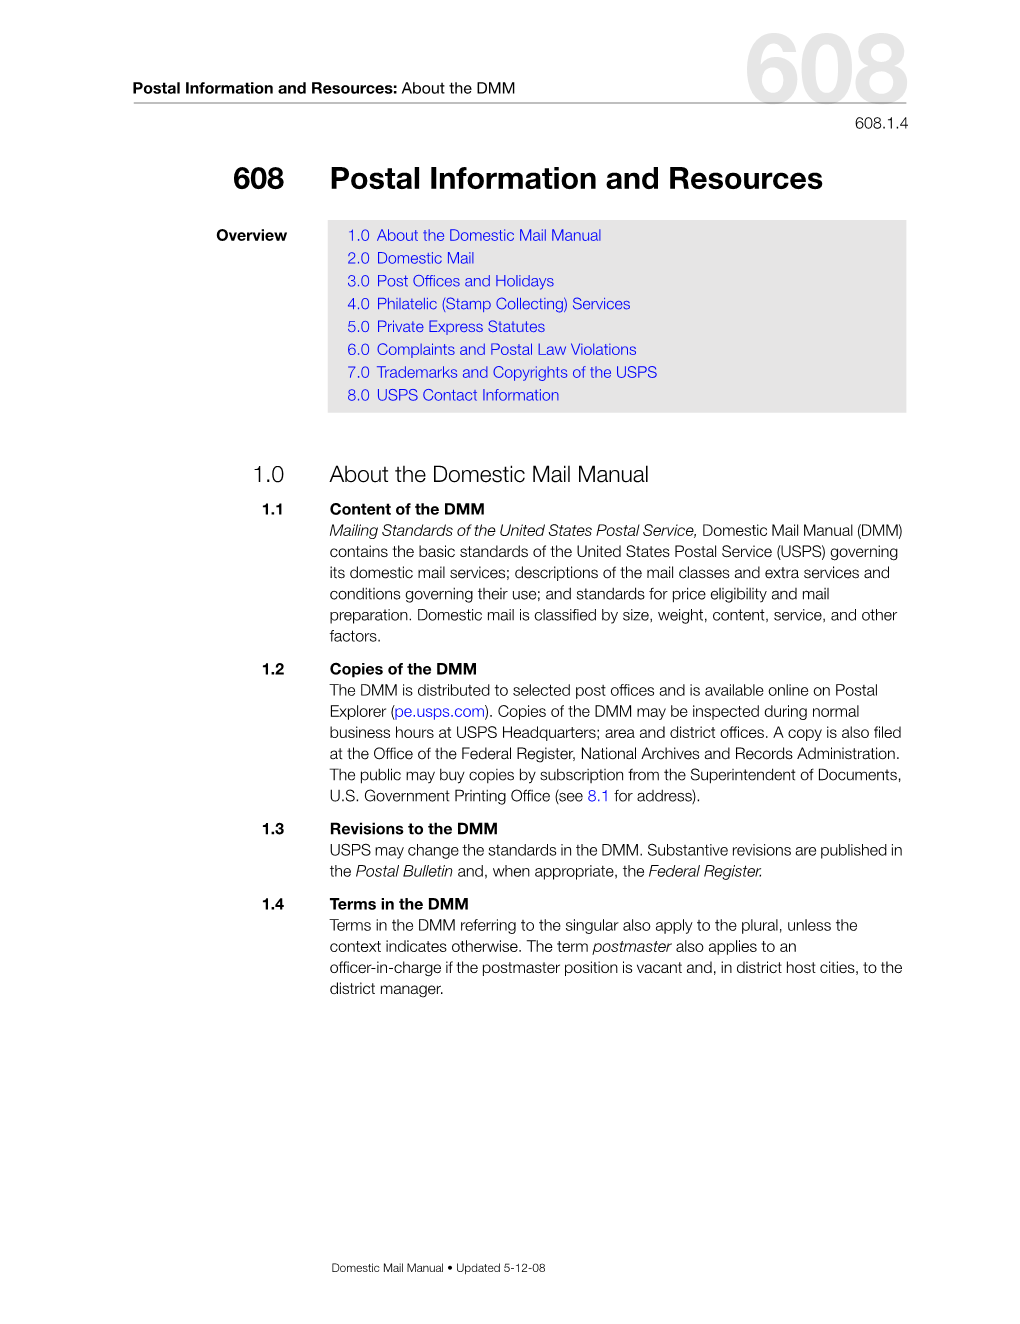 DMM 608 Postal Information and Resources